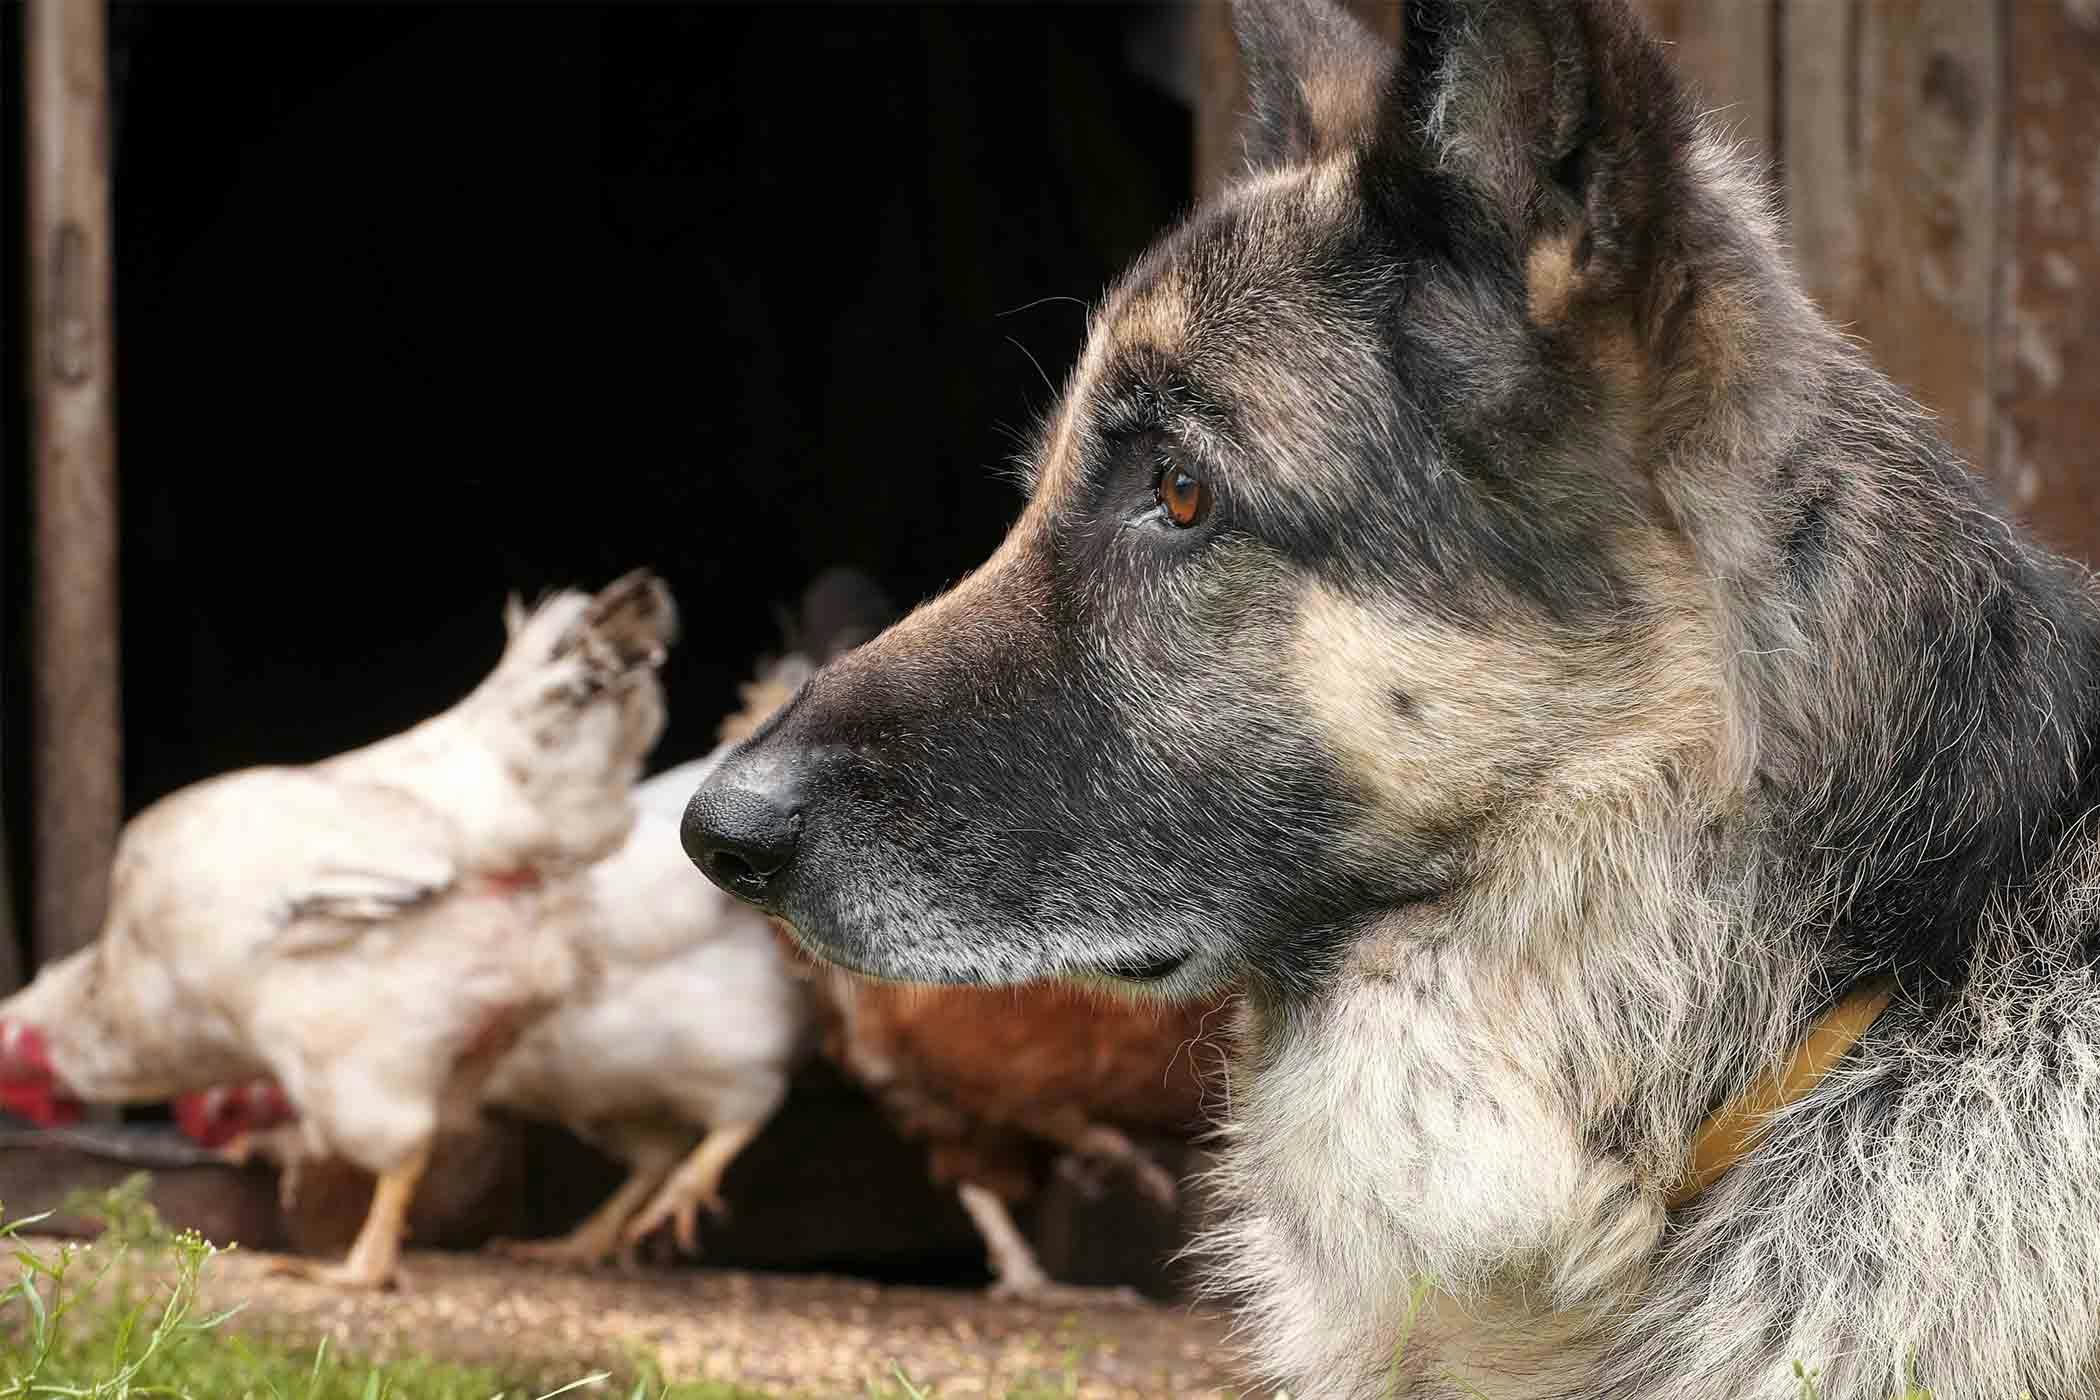 How to Train Your Dog to Not Kill Chickens | Wag!